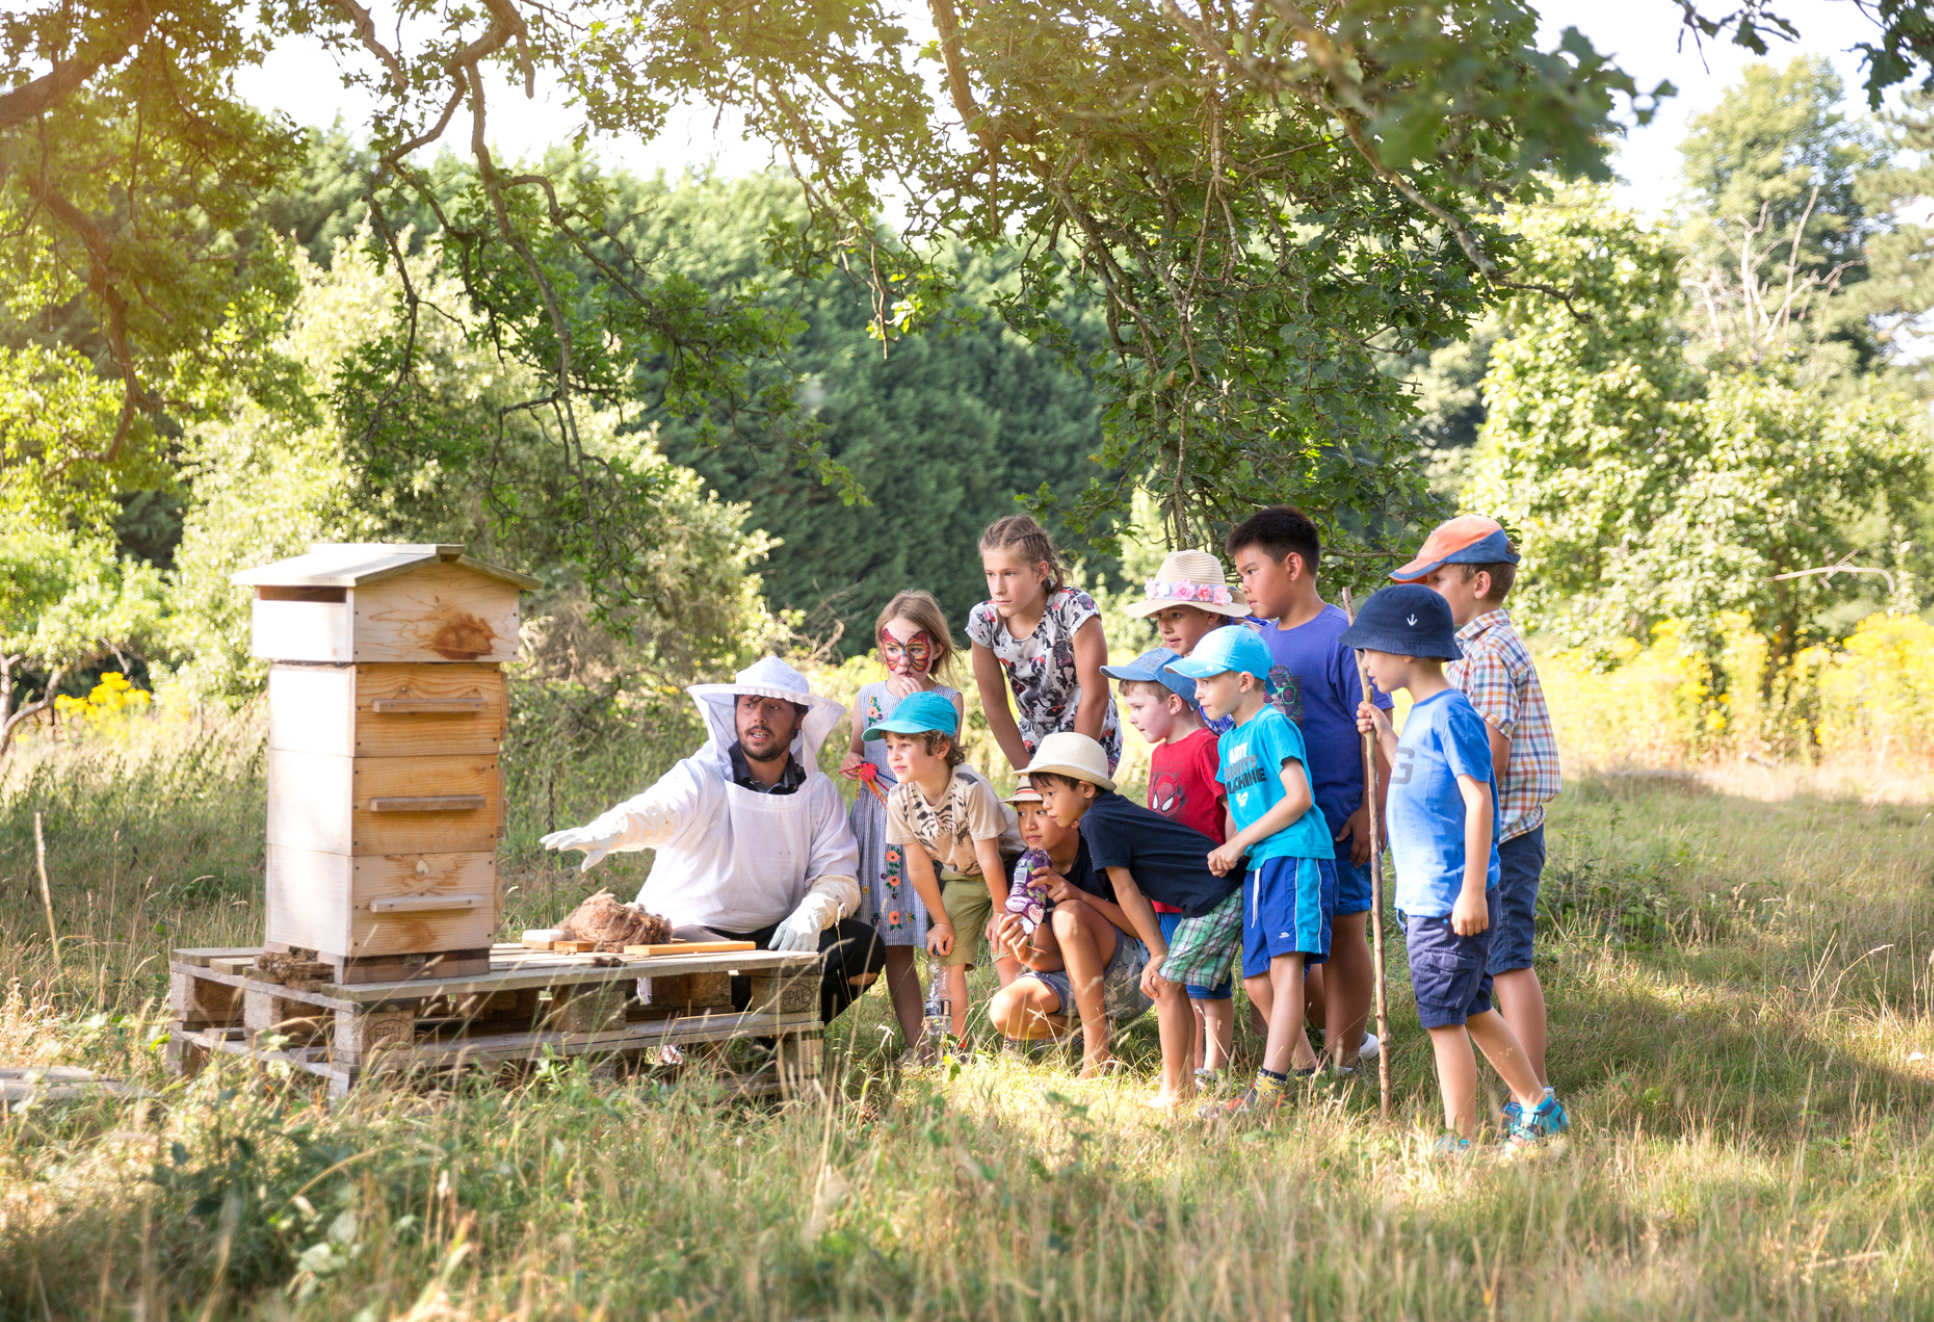 A beekeeper shows some children a hive